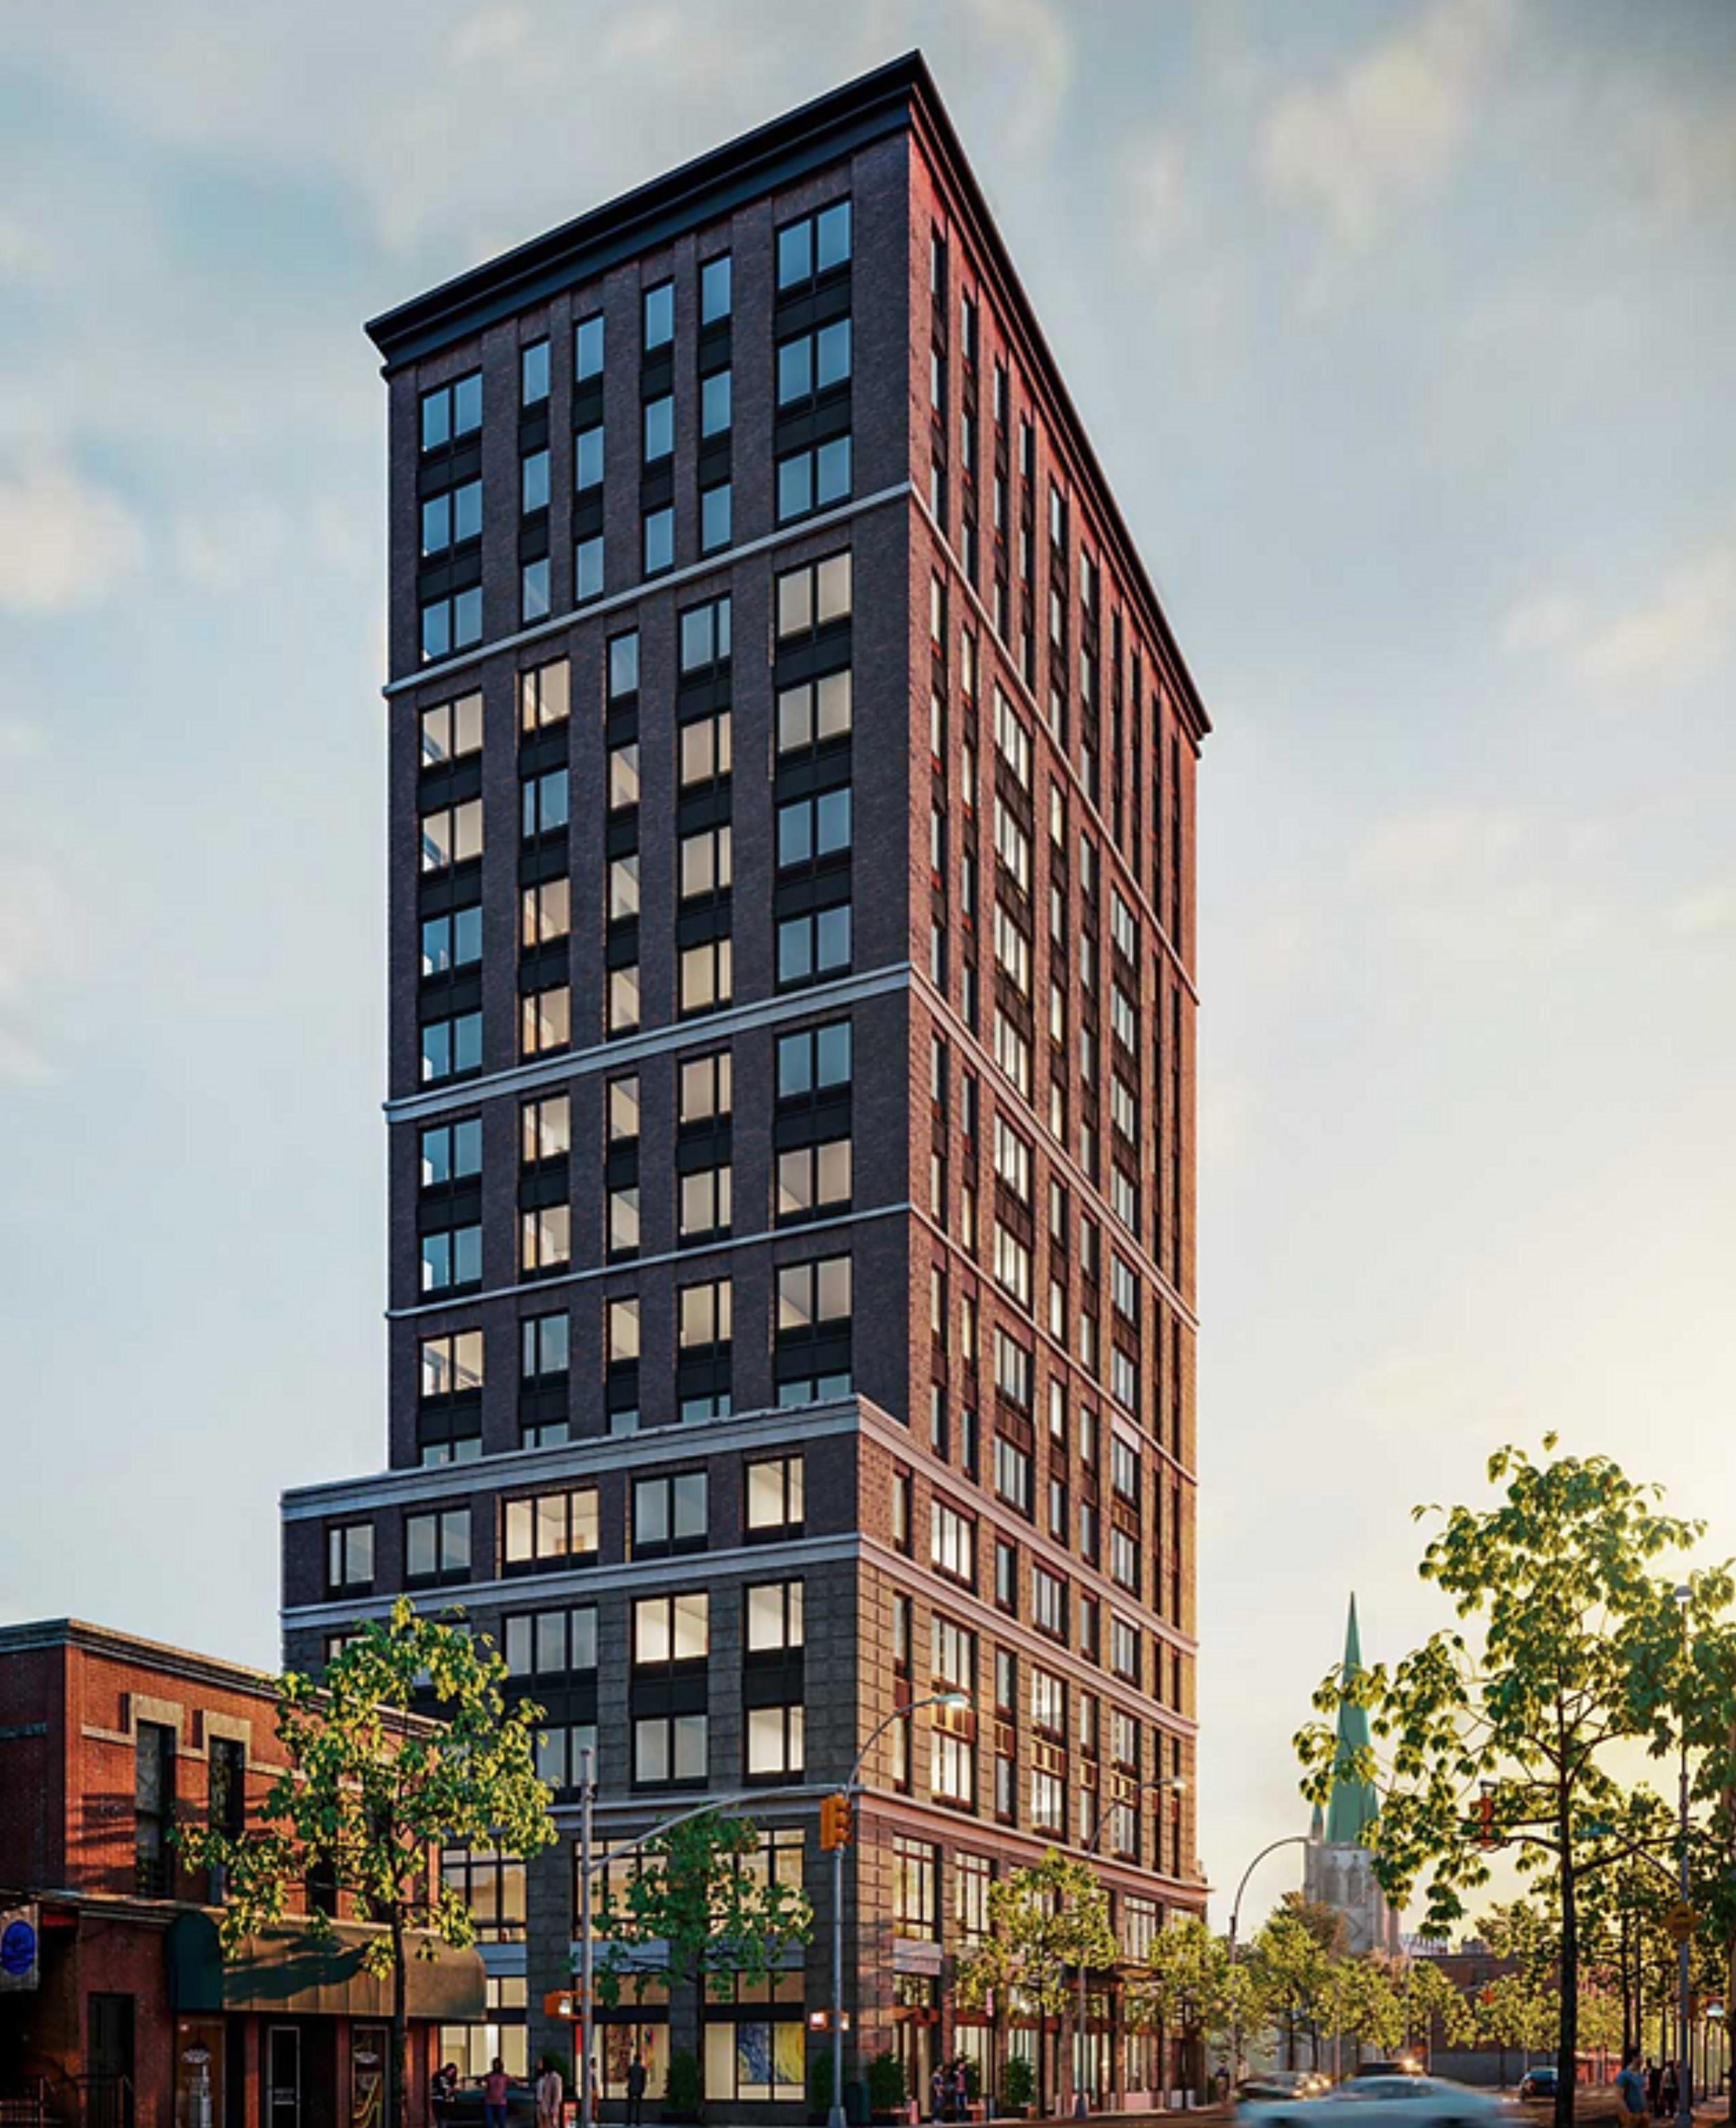 Kawaida Towers will be a 100% affordable, 16-story, 66-unit multifamily development